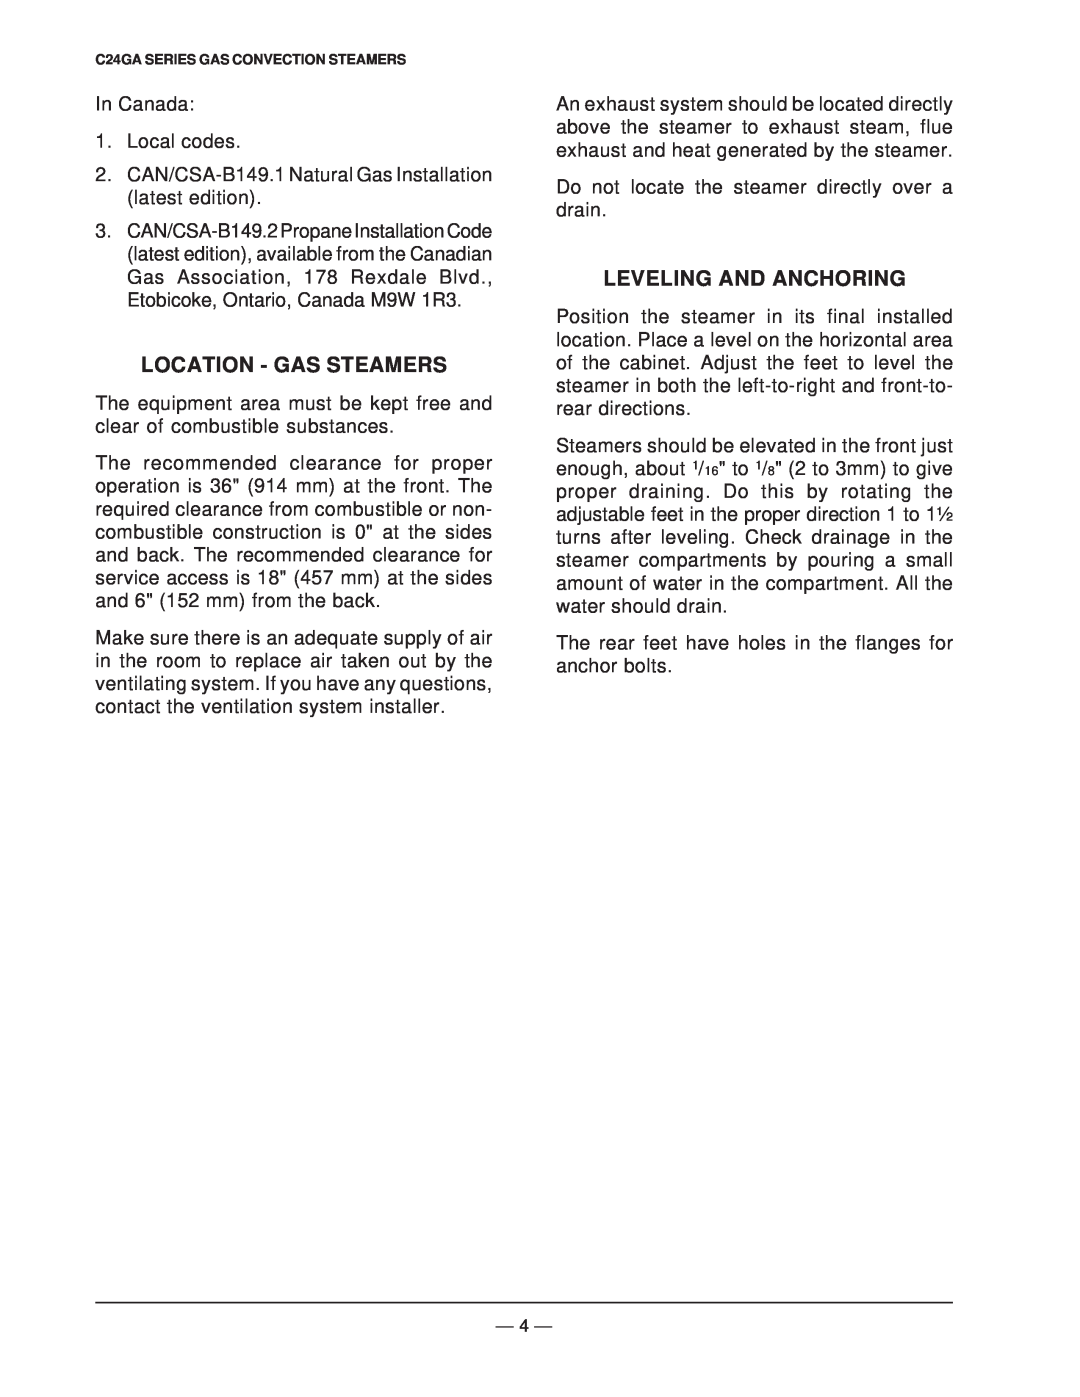 Vulcan-Hart ML-136057, ML-136056 operation manual Location - Gas Steamers, Leveling And Anchoring 